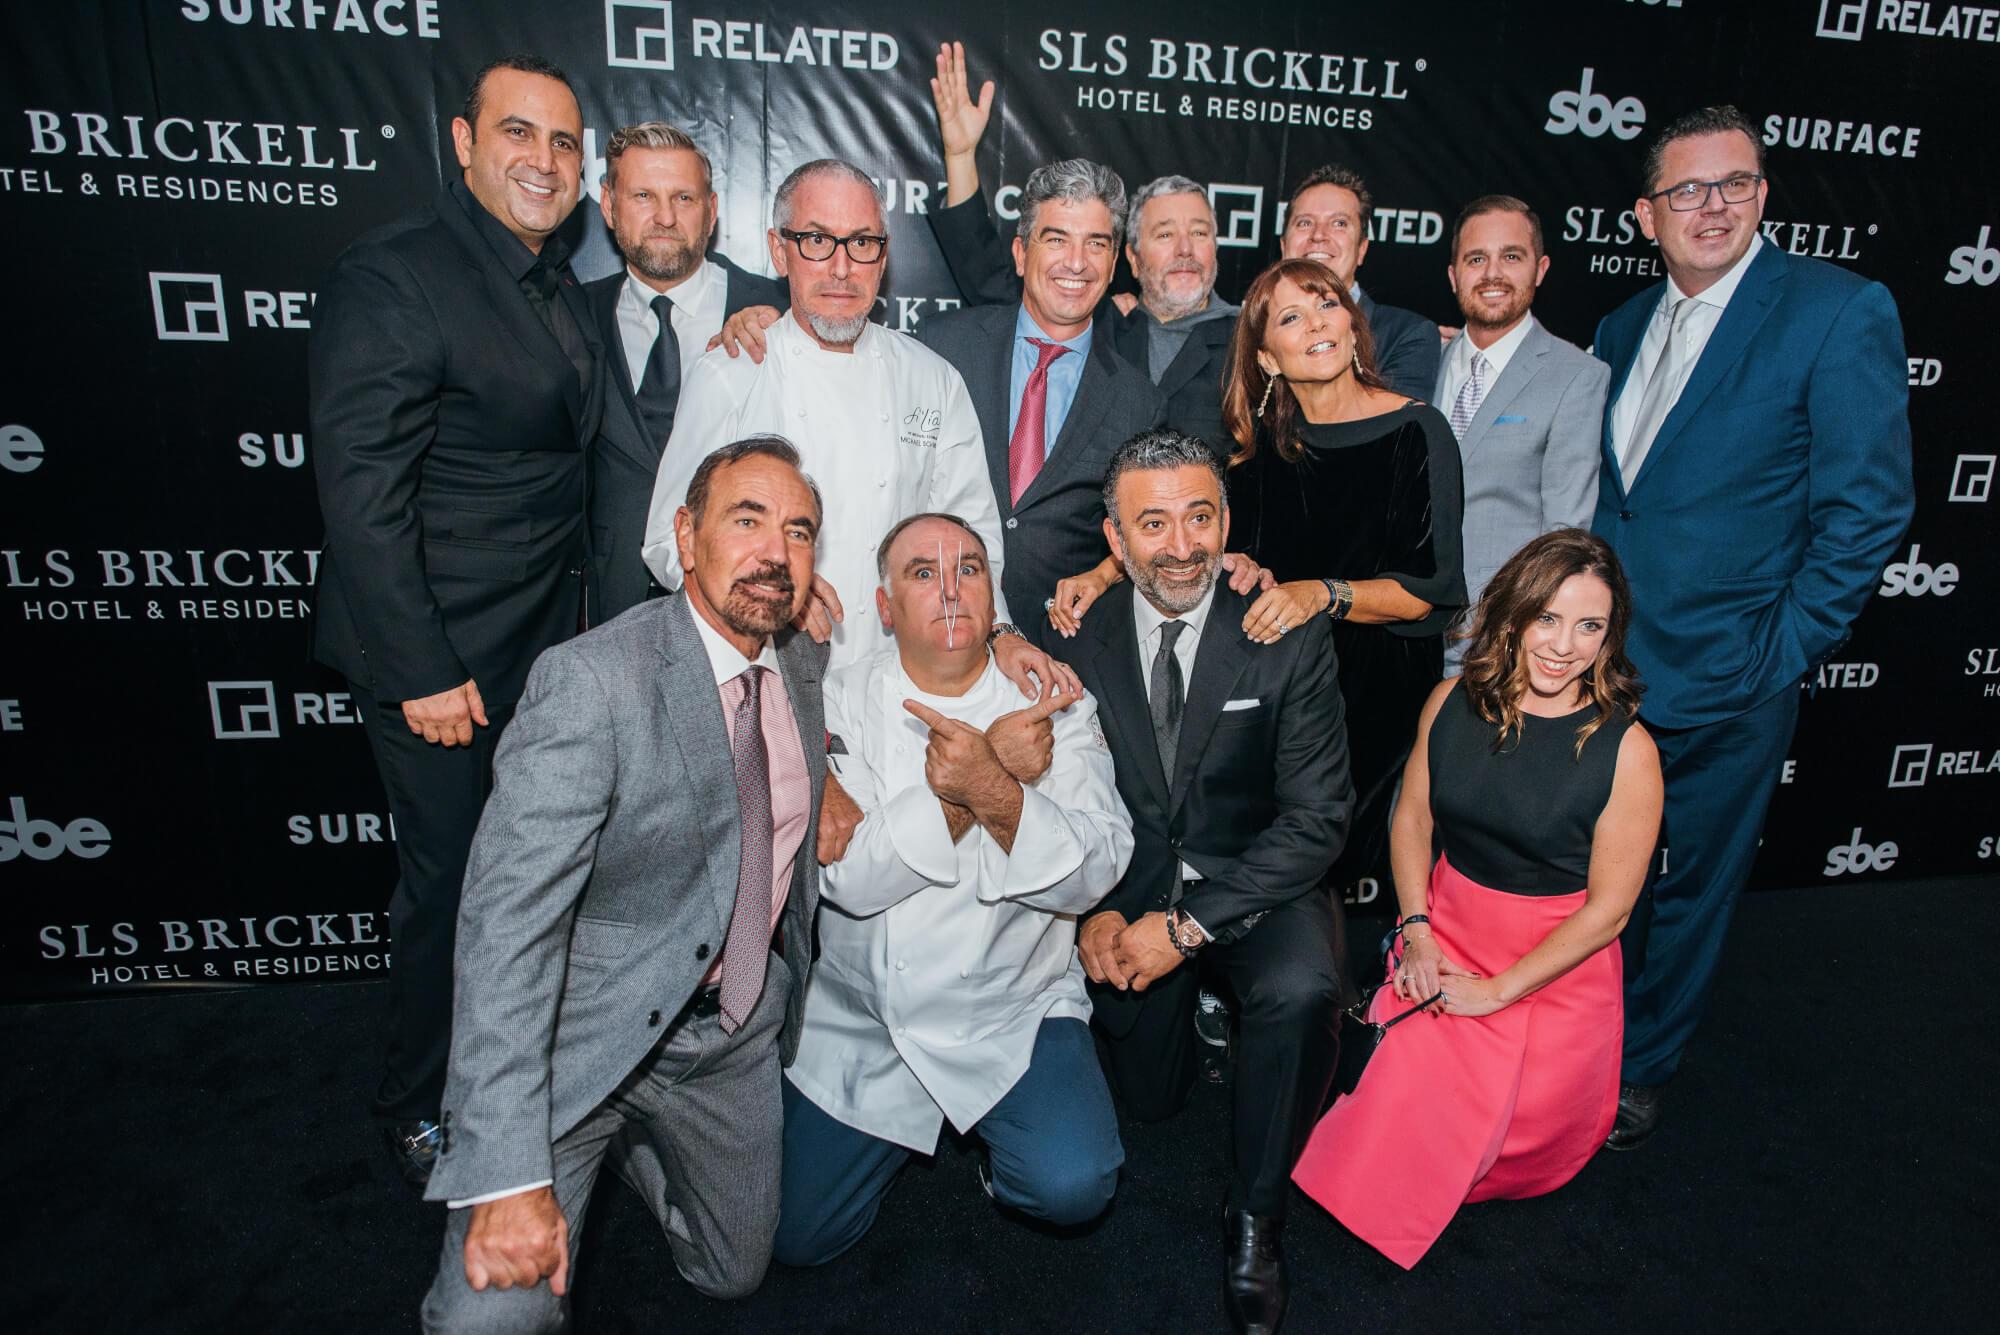 SLS BRICKELL, TIMELESS ELEGANCE, HUMOR, POETRY, AND PLAYFULNESS 